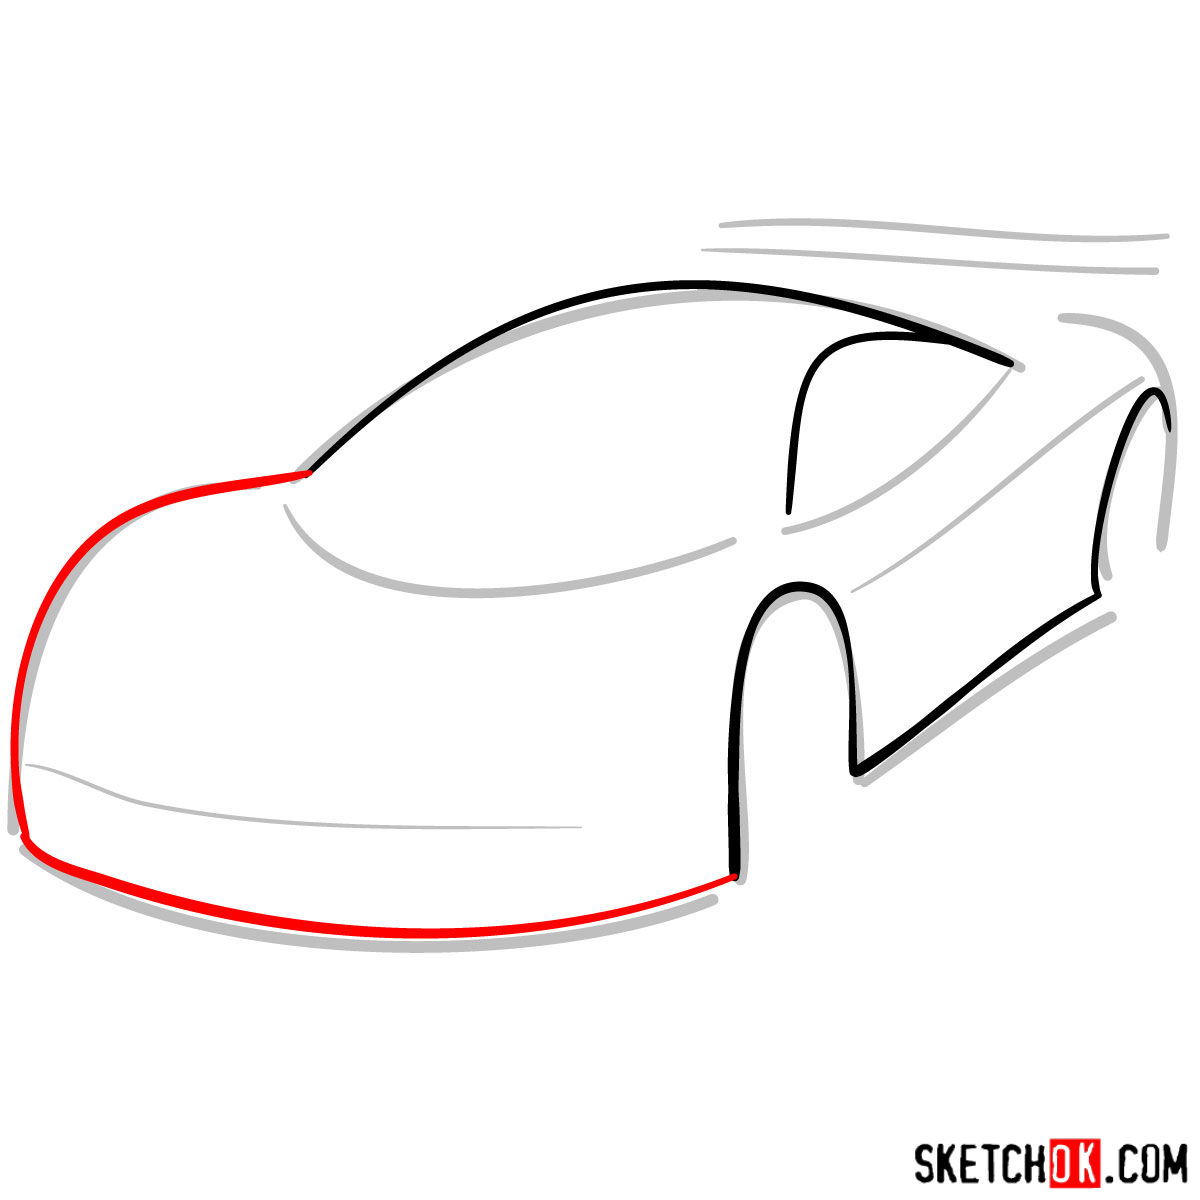 McLaren F1 - step by step drawing guide - step 04